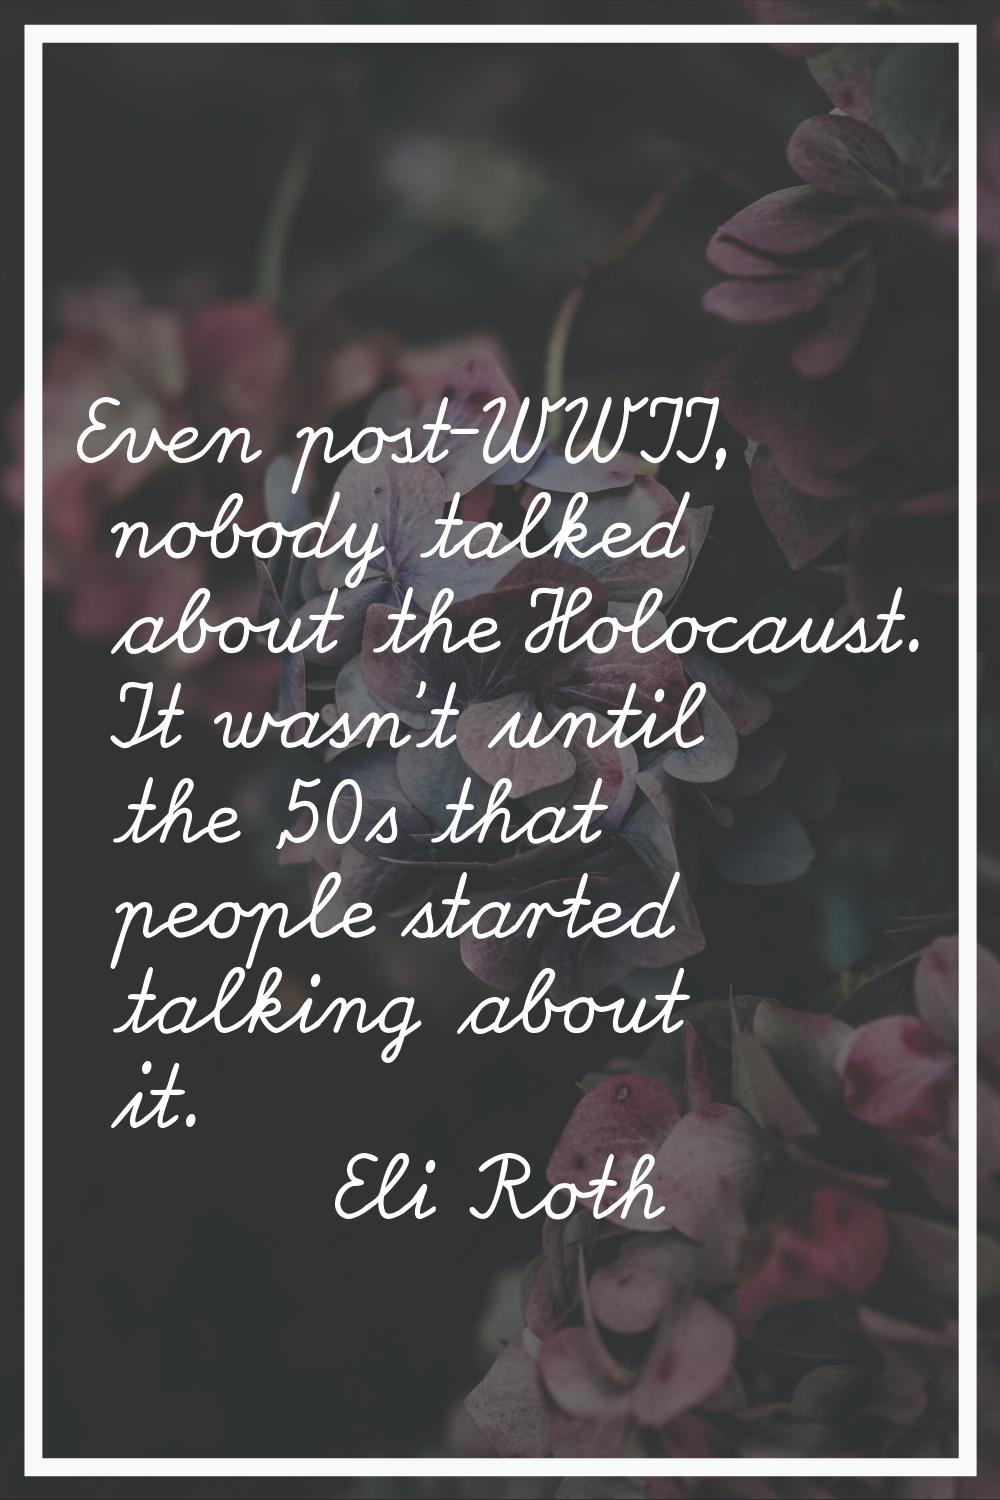 Even post-WWII, nobody talked about the Holocaust. It wasn't until the '50s that people started tal